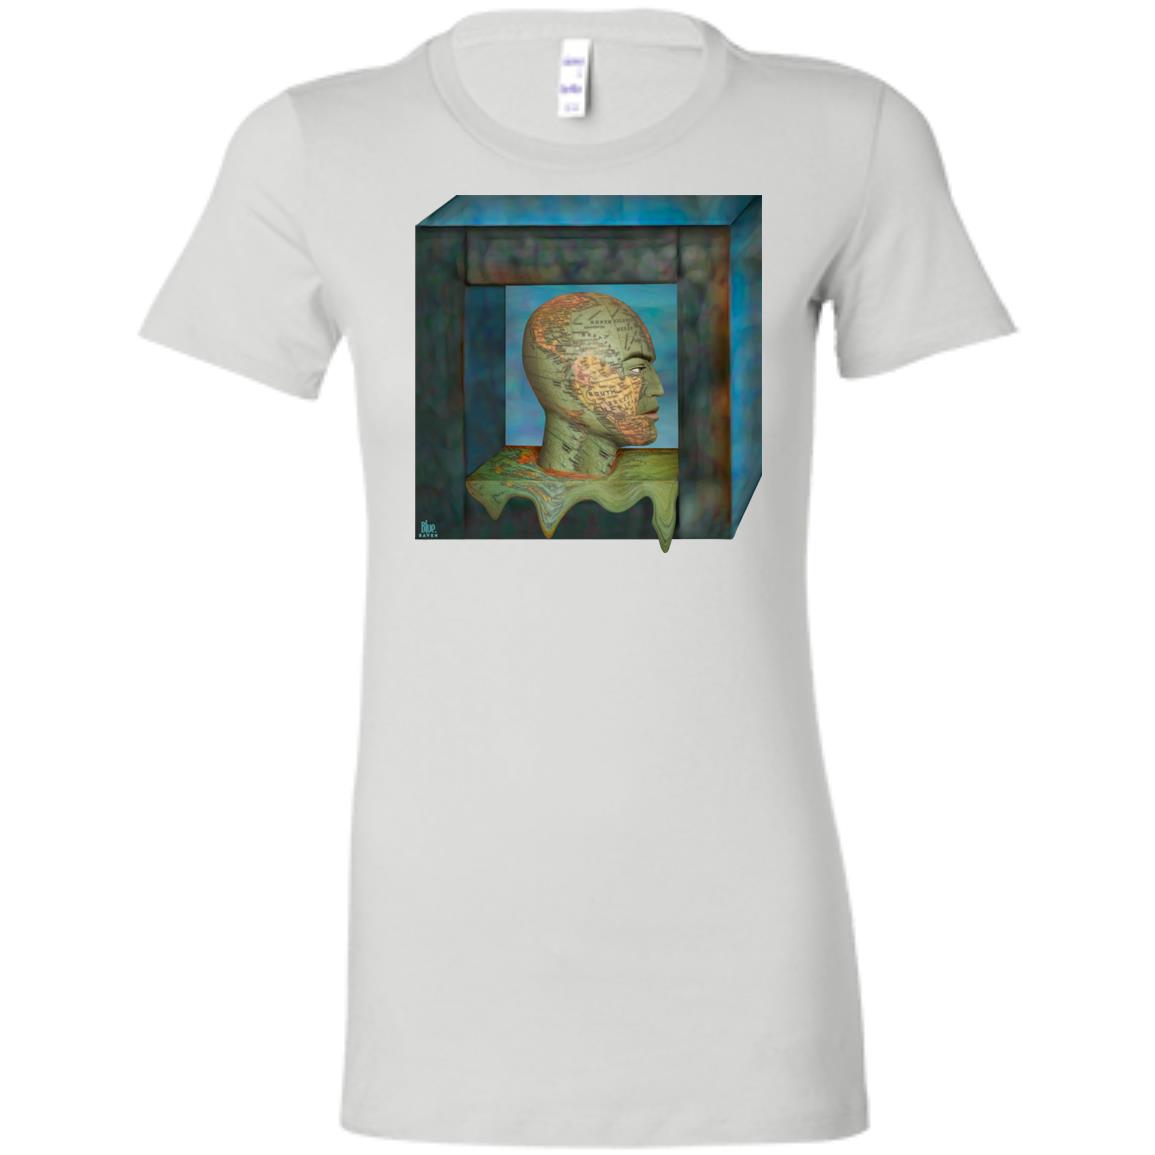 Boxed In - Women's Fitted T-Shirt